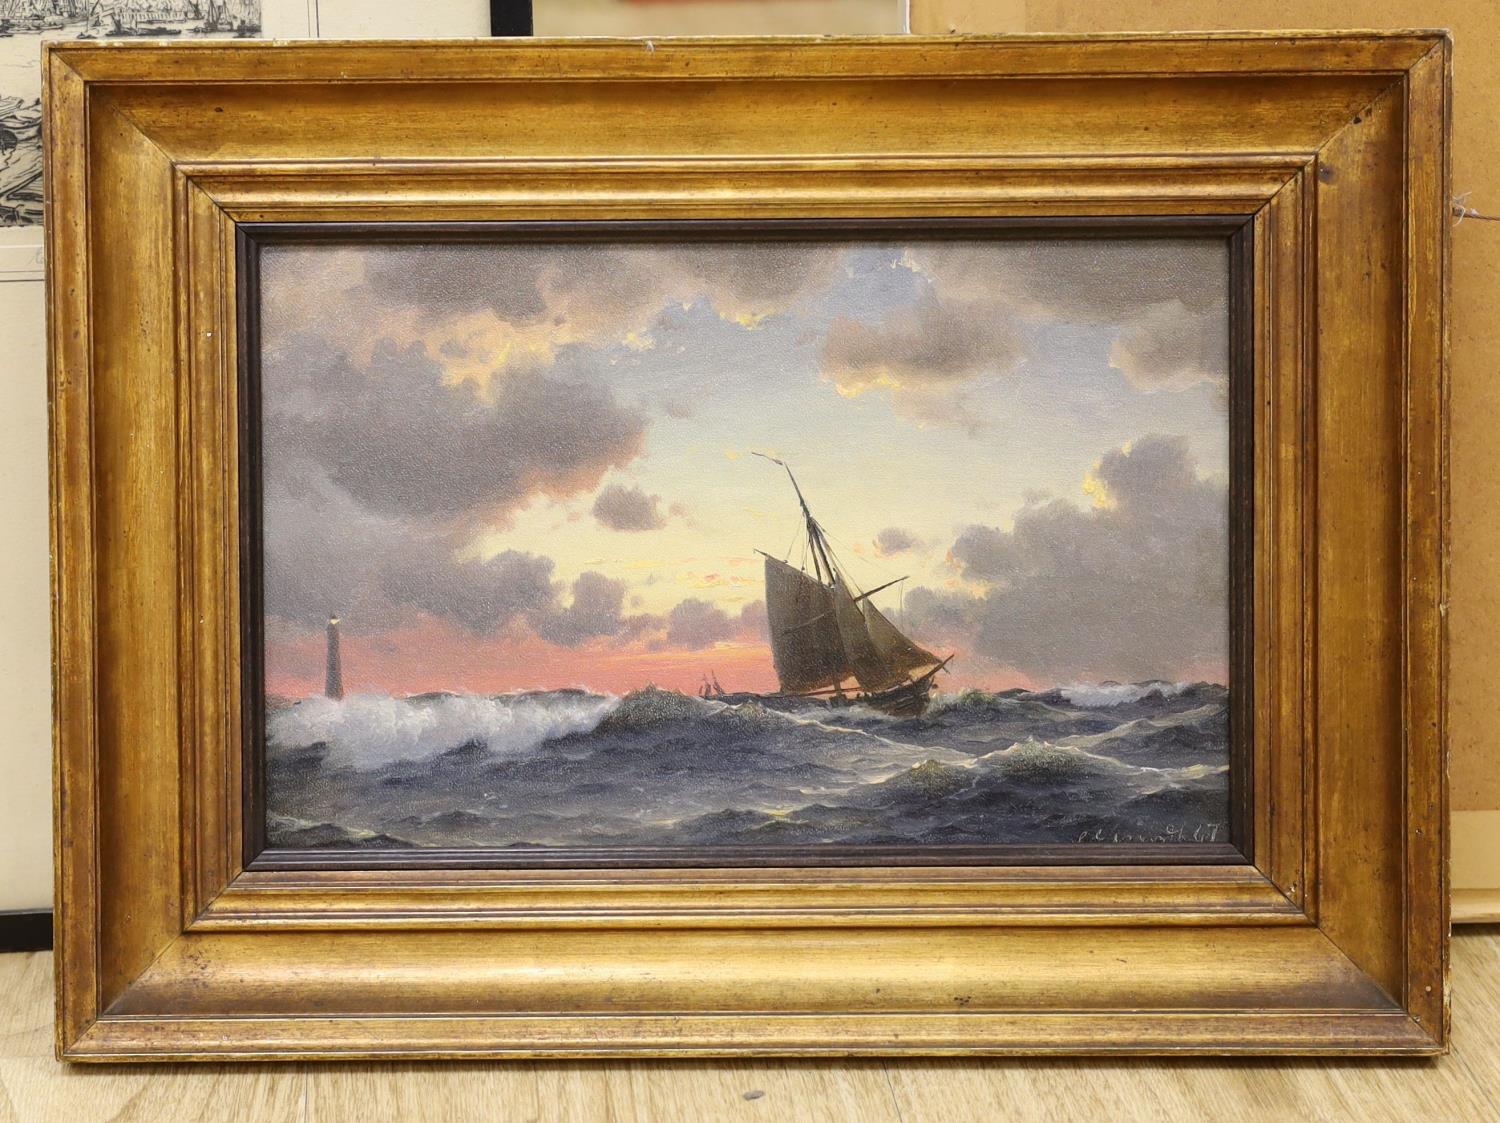 Christian Eckhardt (1832-1914), oil on canvas, Off Skagen at Sunset, signed and dated 1867, 20 x - Image 2 of 4